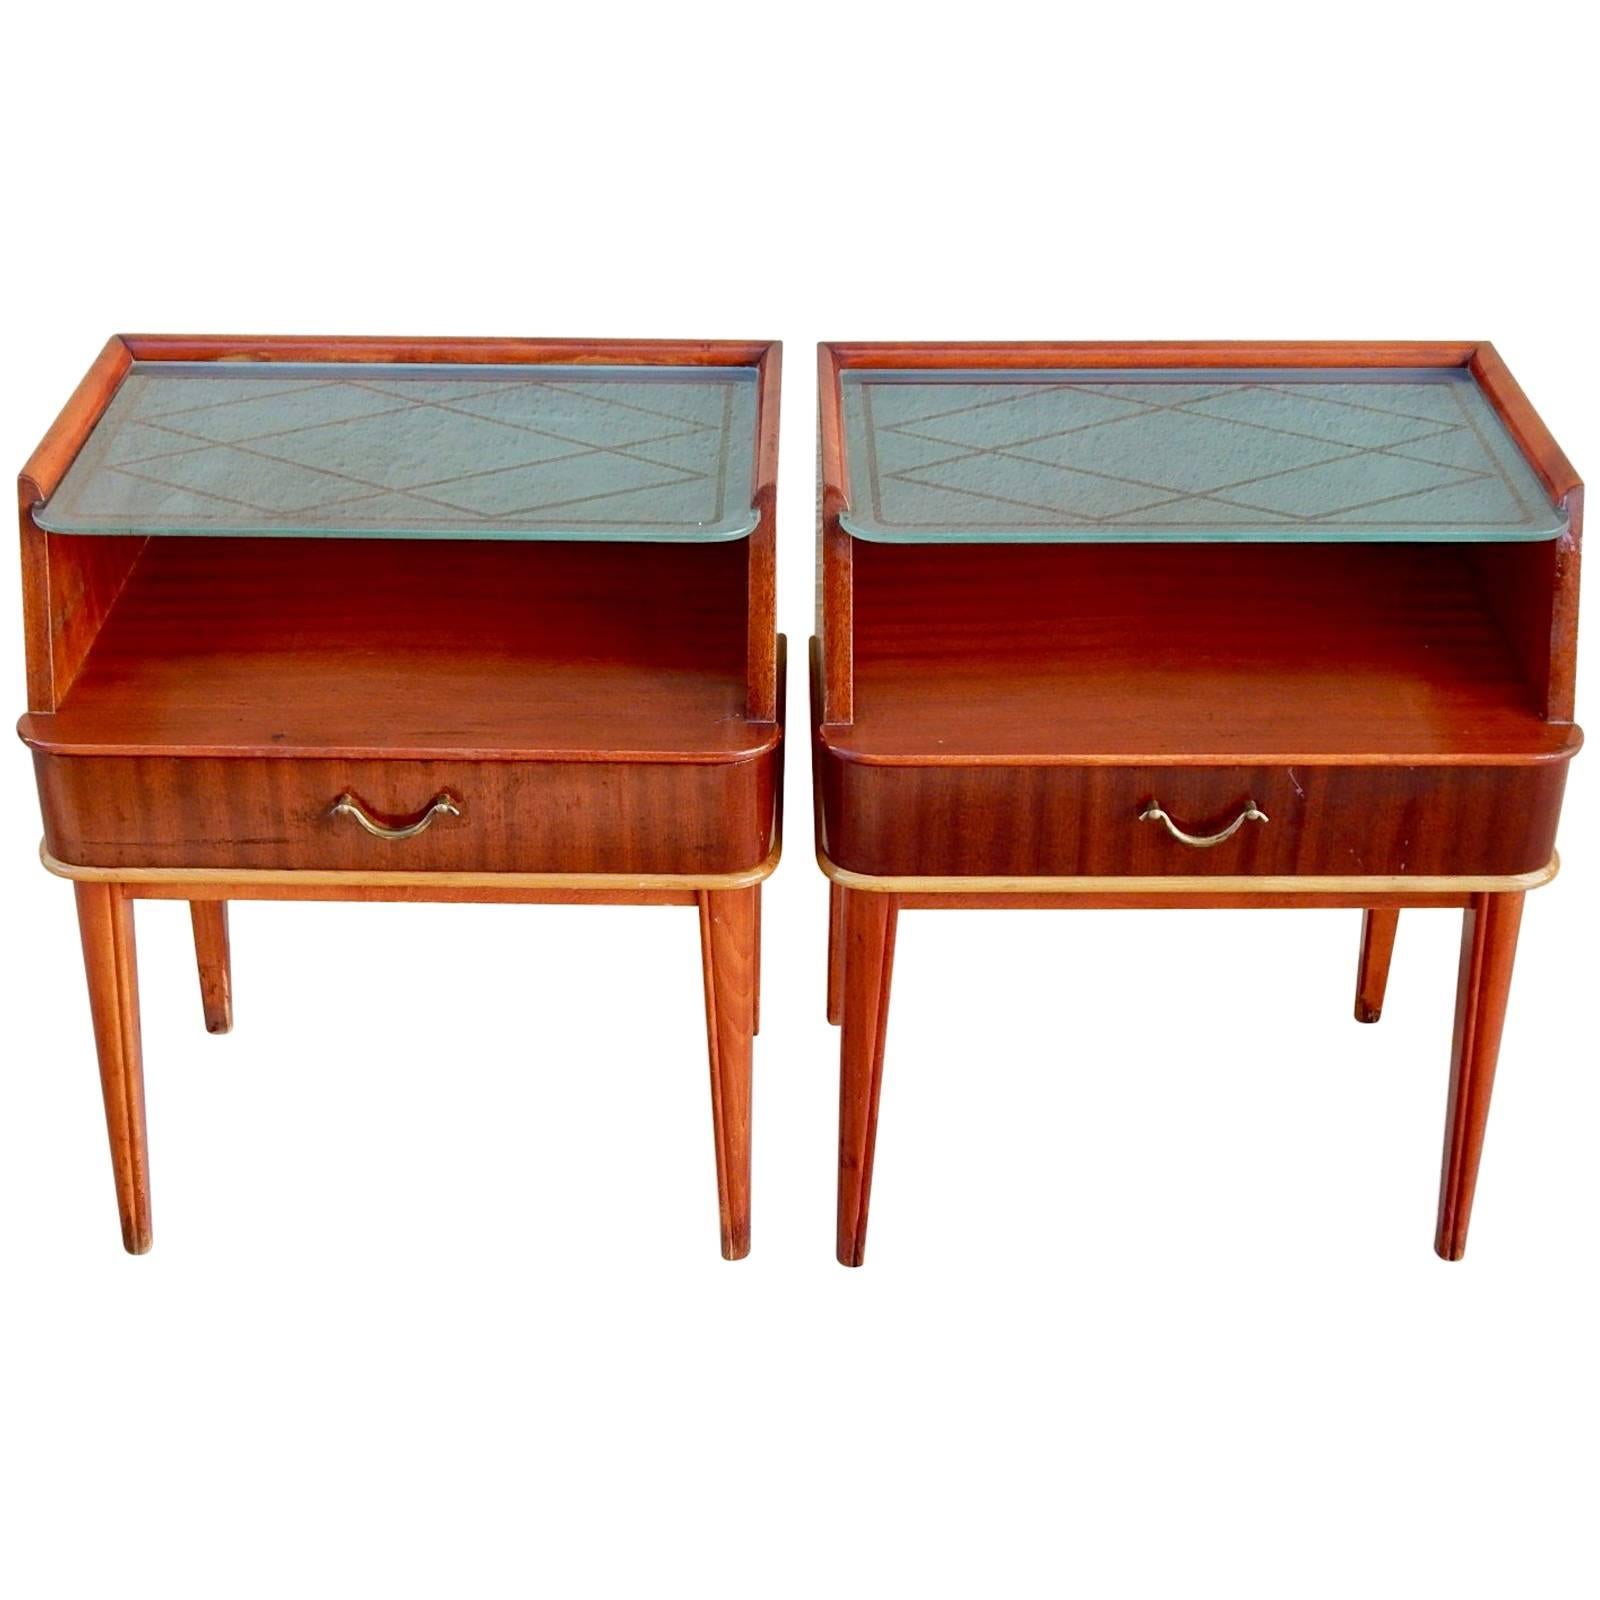 Pair of Swedish Mid-Century Modern End Tables in Mahogany and Glass, circa 1950 For Sale